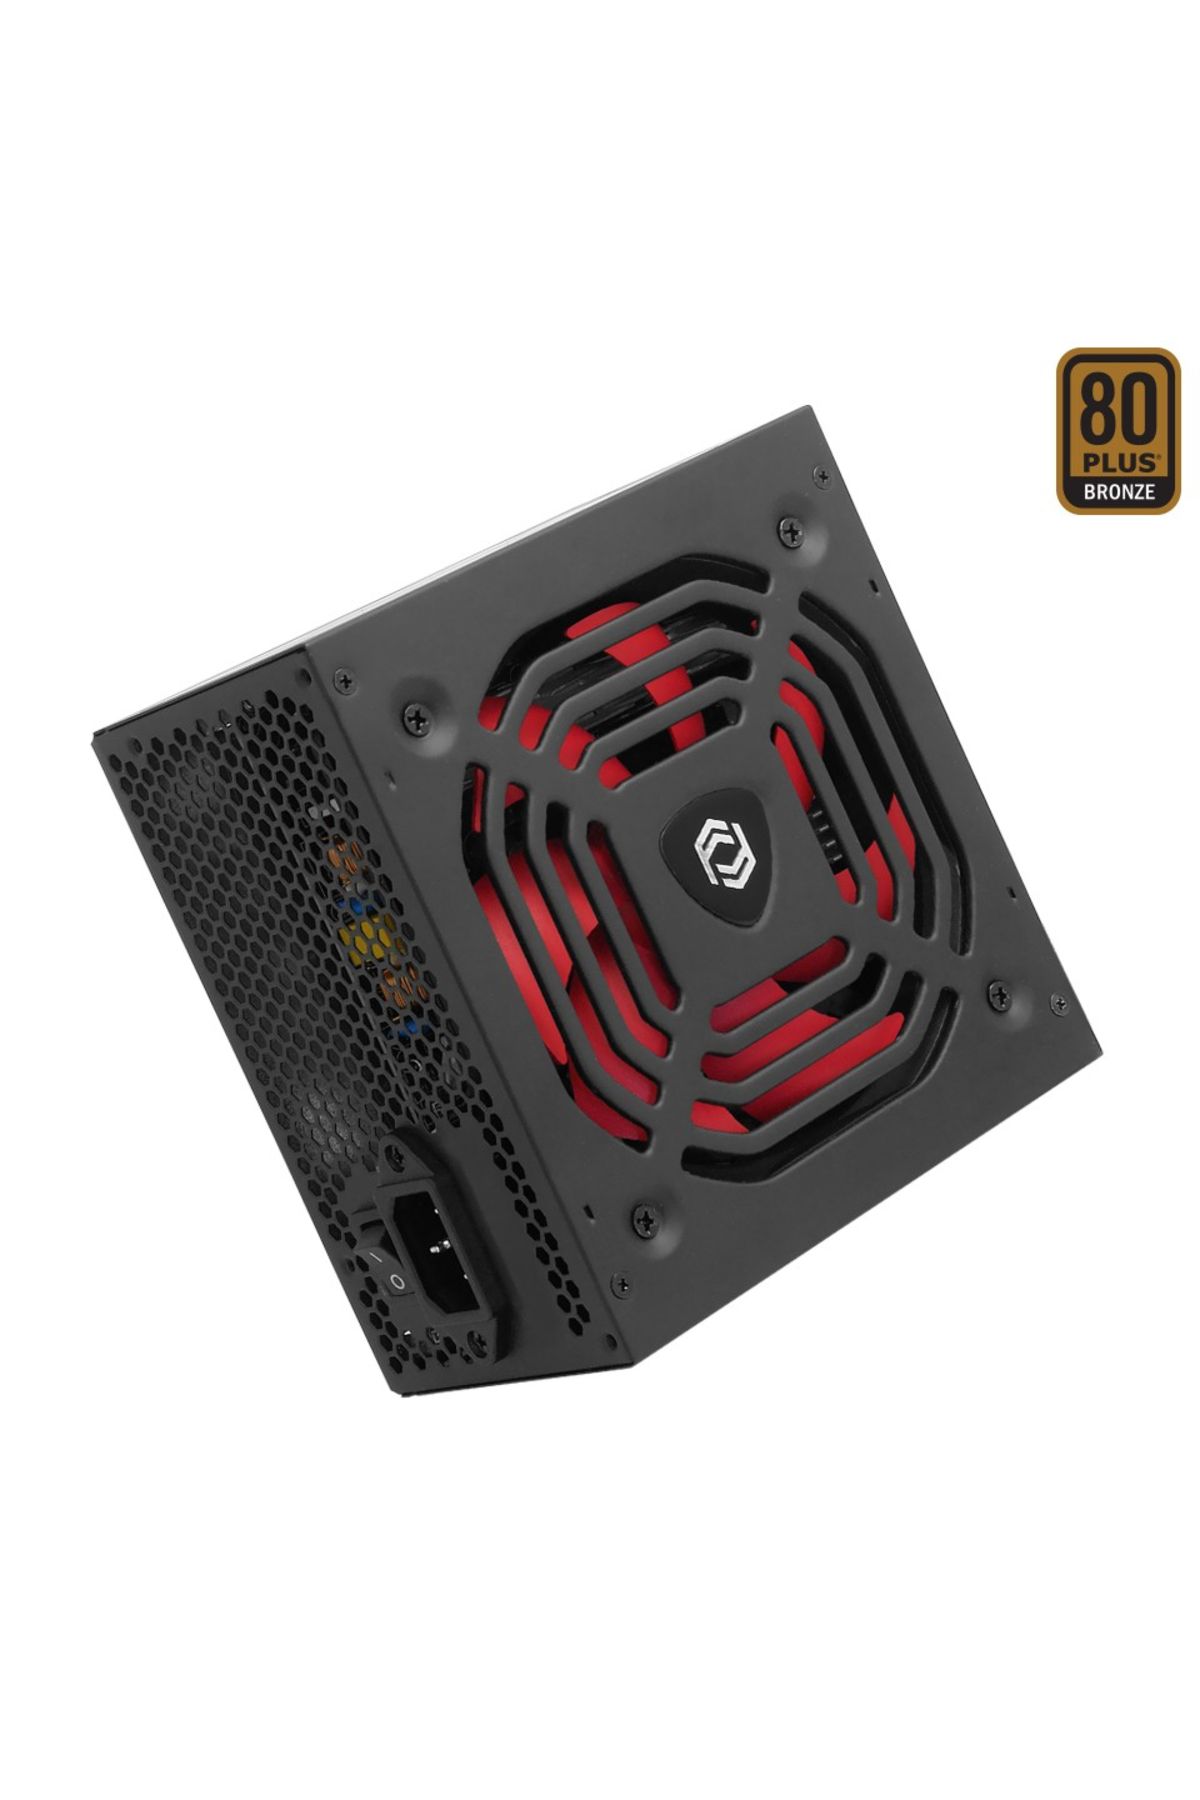 Frisby Fr-ps6080p 600w 80 Bronz Power Supply